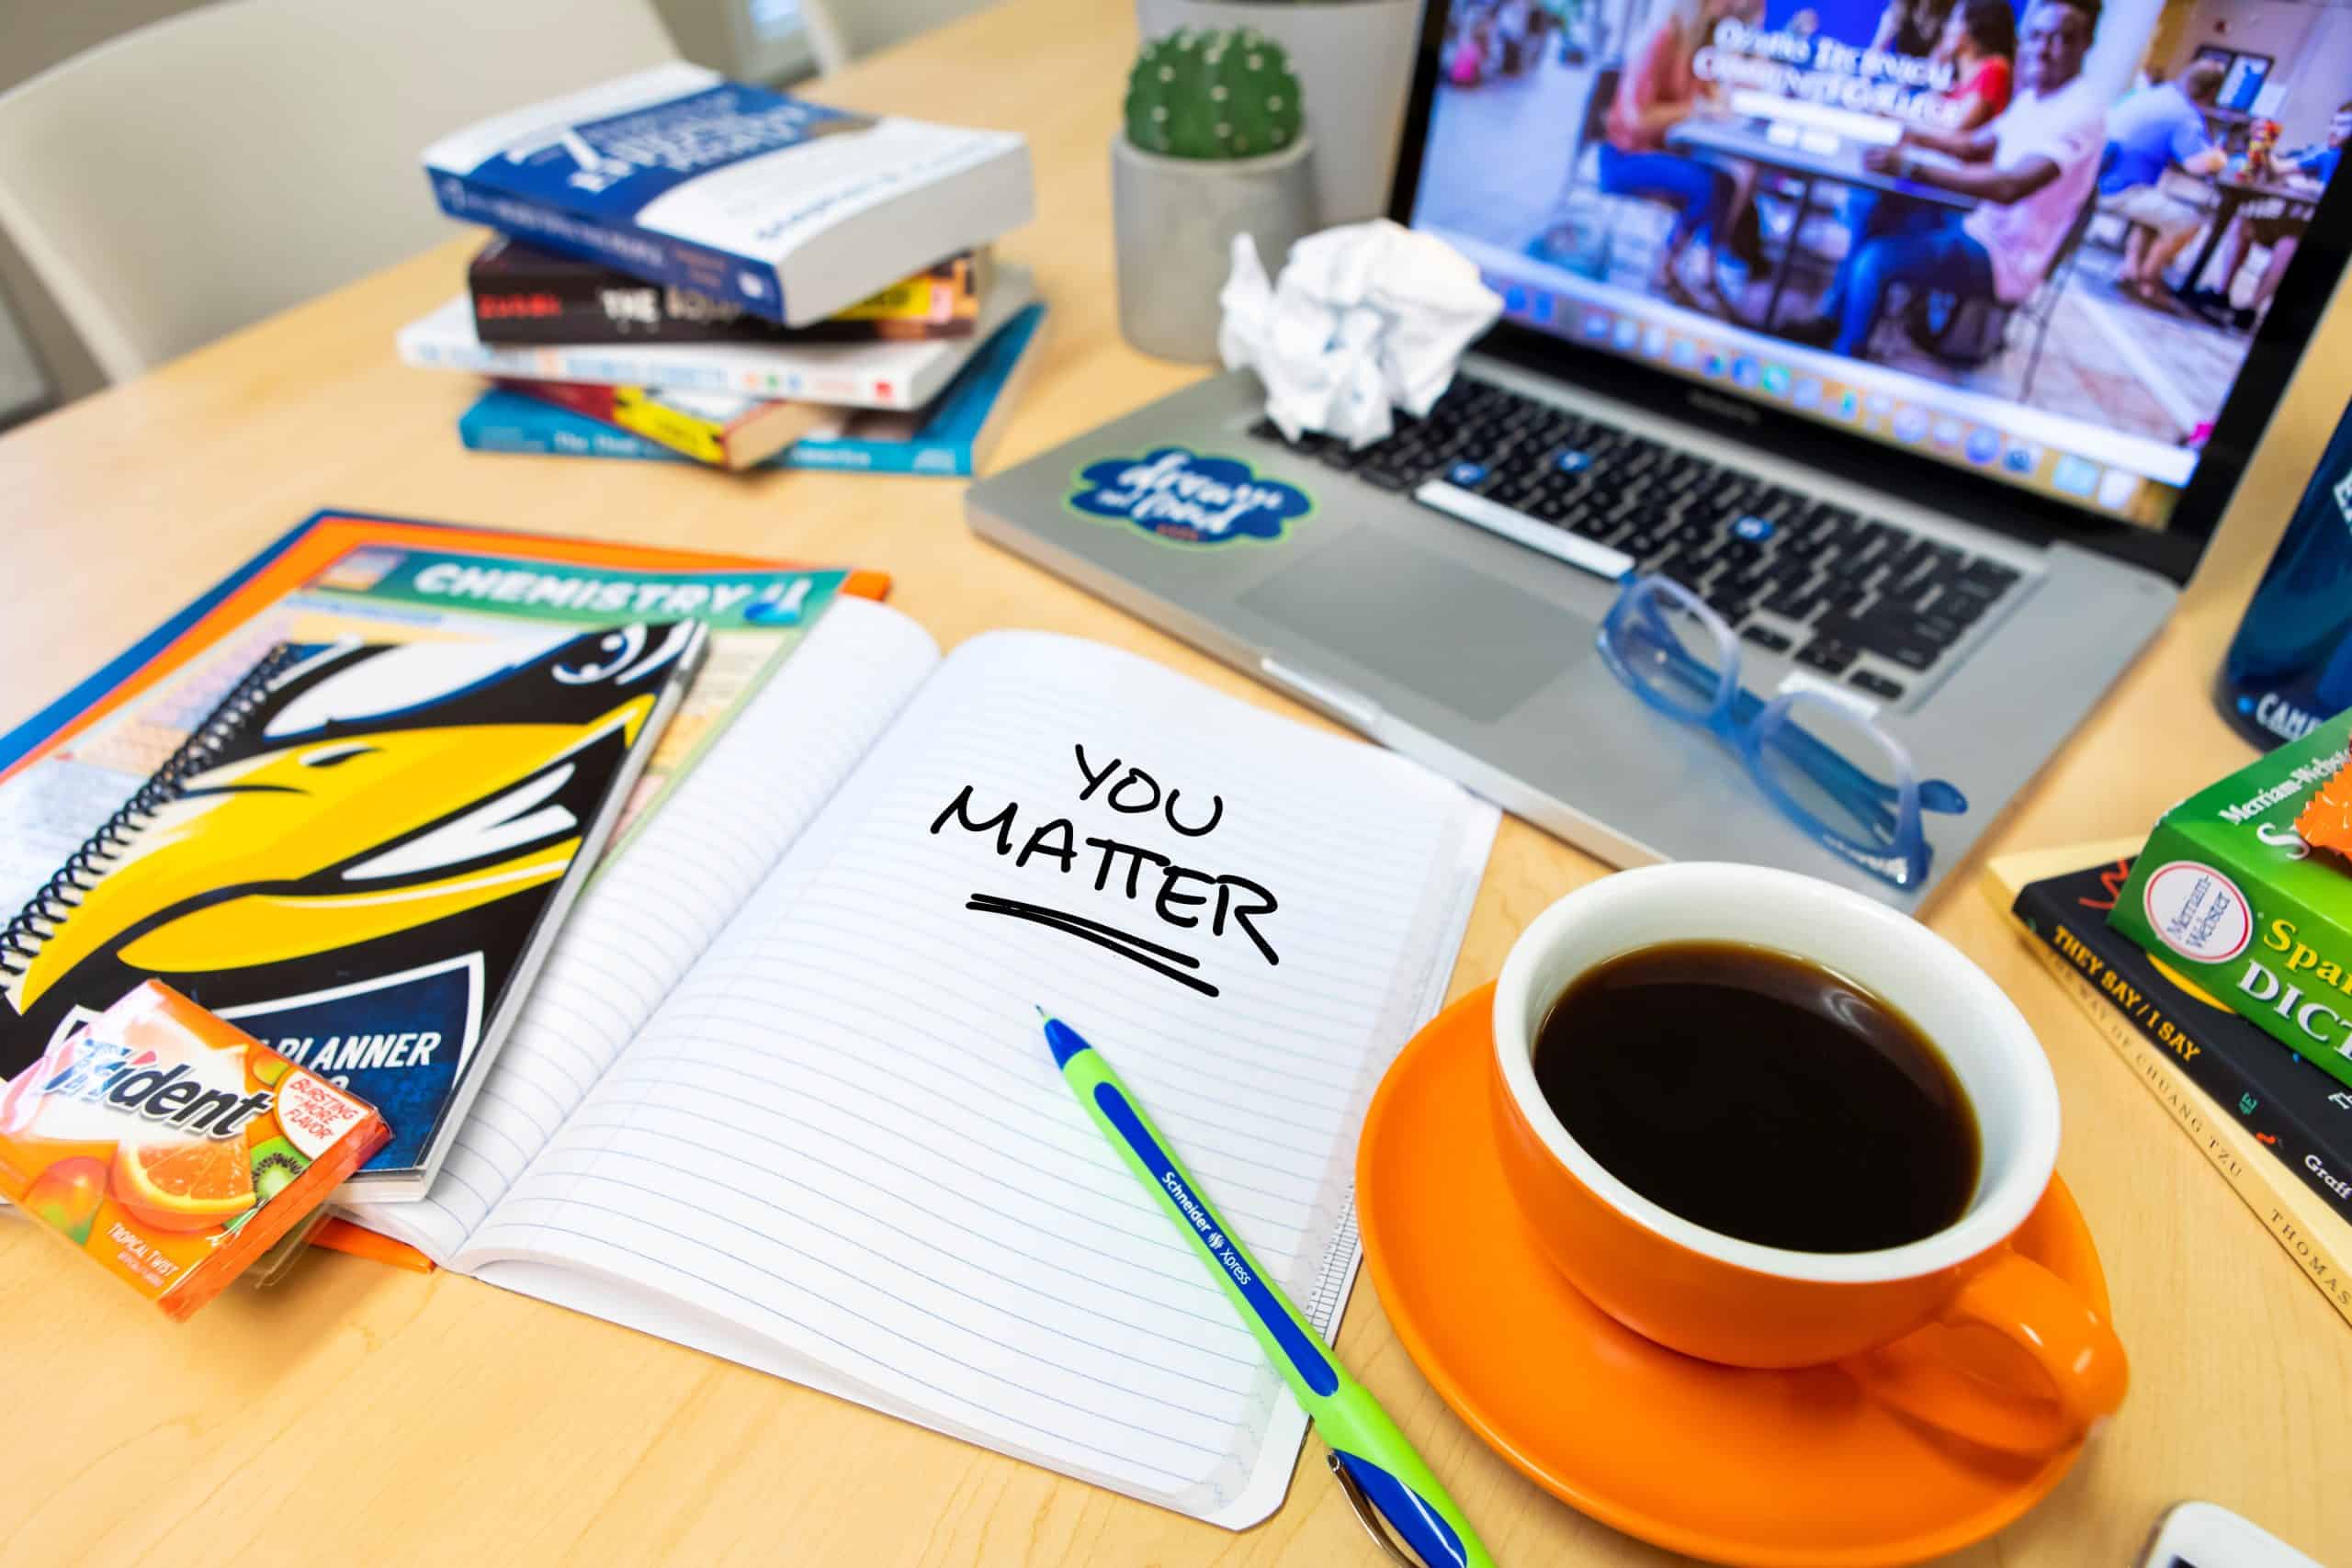 A student's desk with the words "you matter" written on a piece of notebook paper.